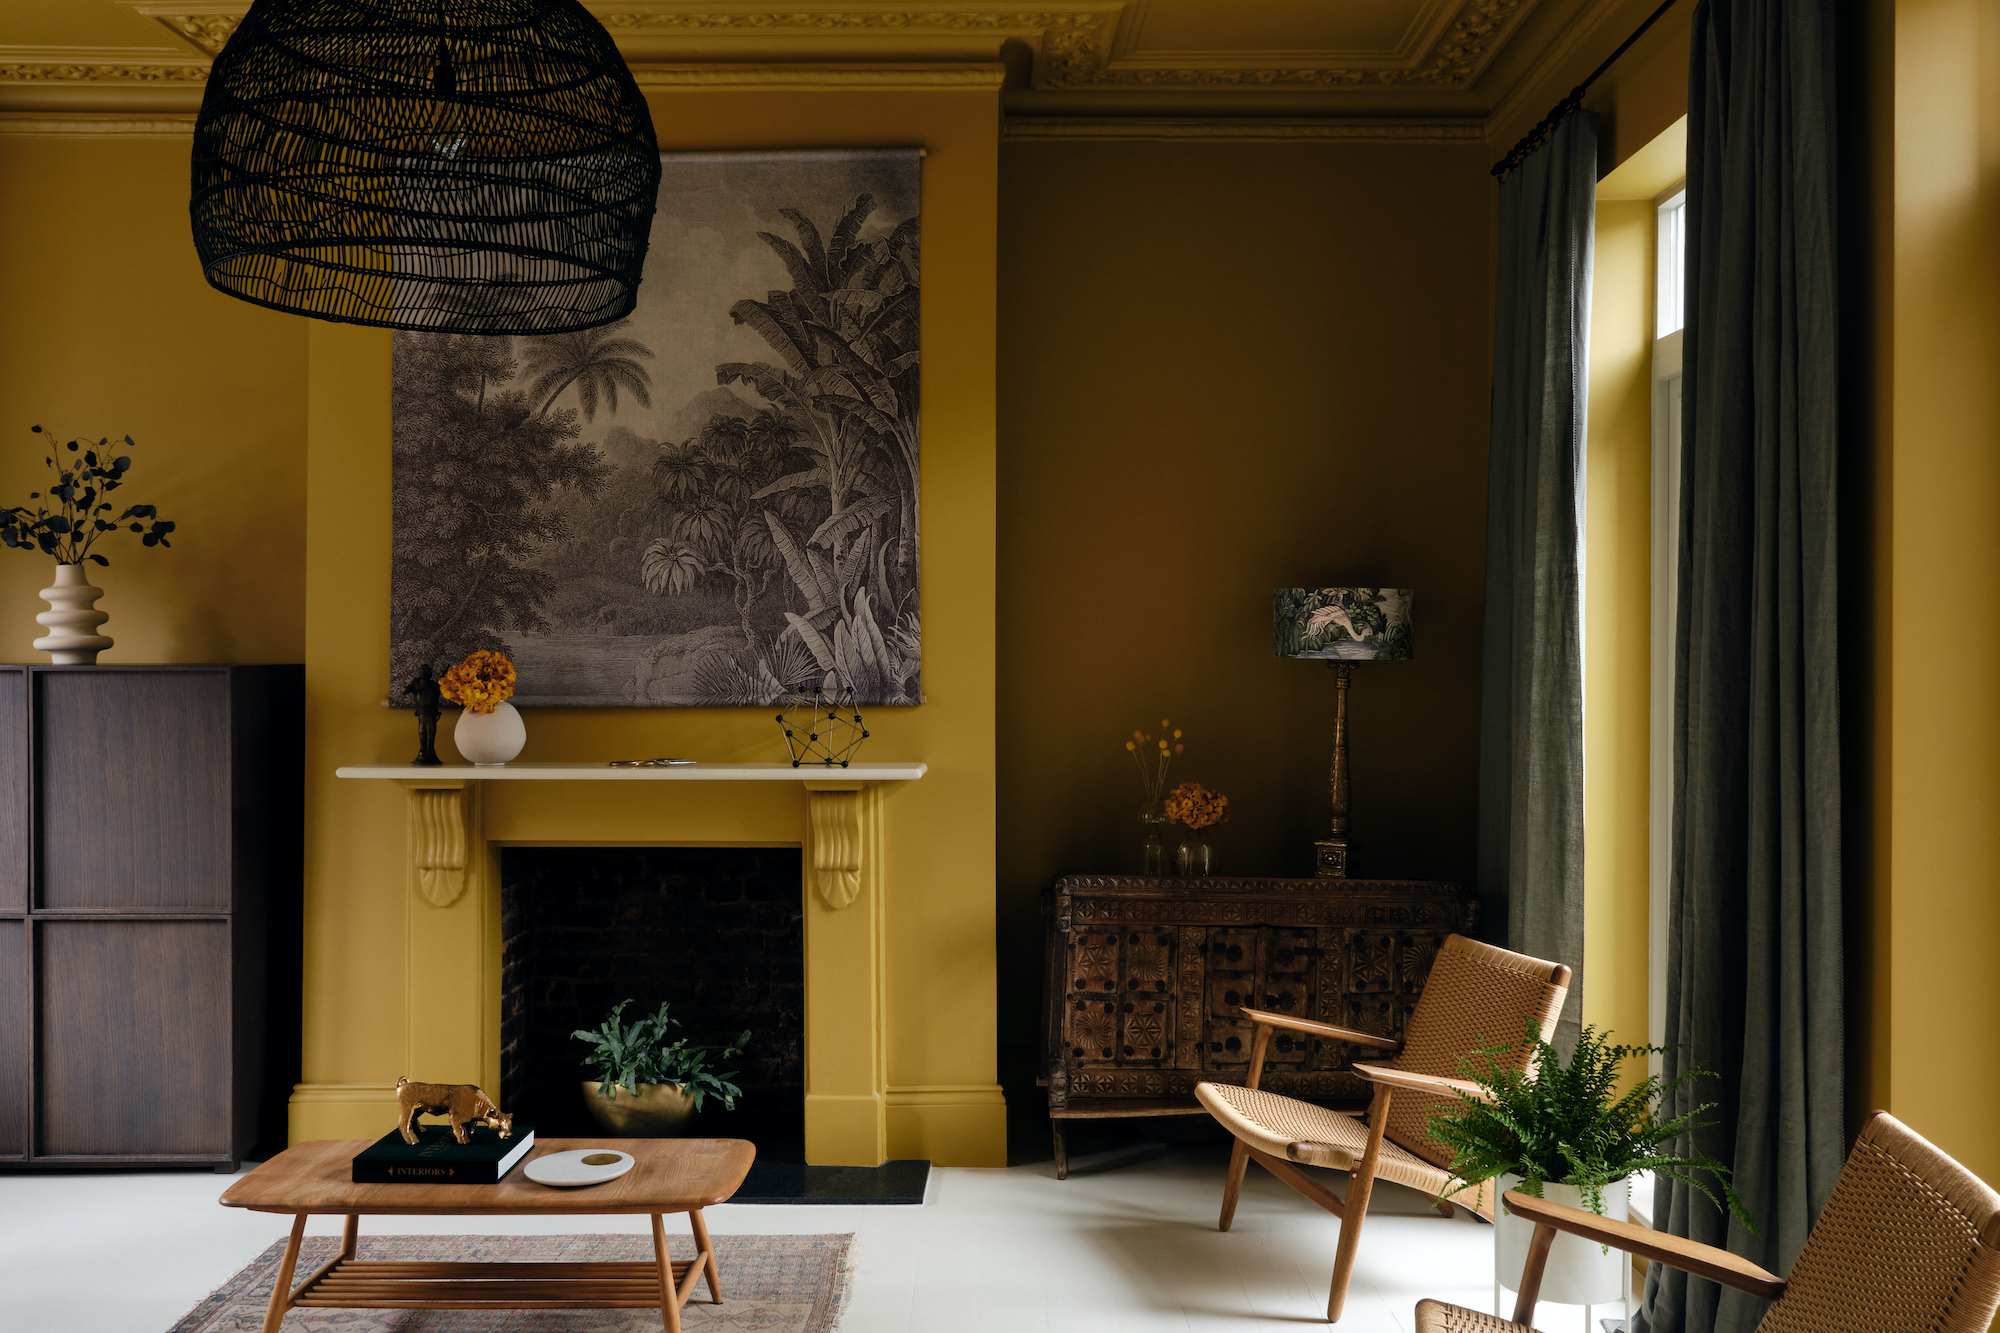 Mylands collaborated with designer Siri Zanelli to create a wraparound look, using their Freegrove Mustard paint - Effect Magazine